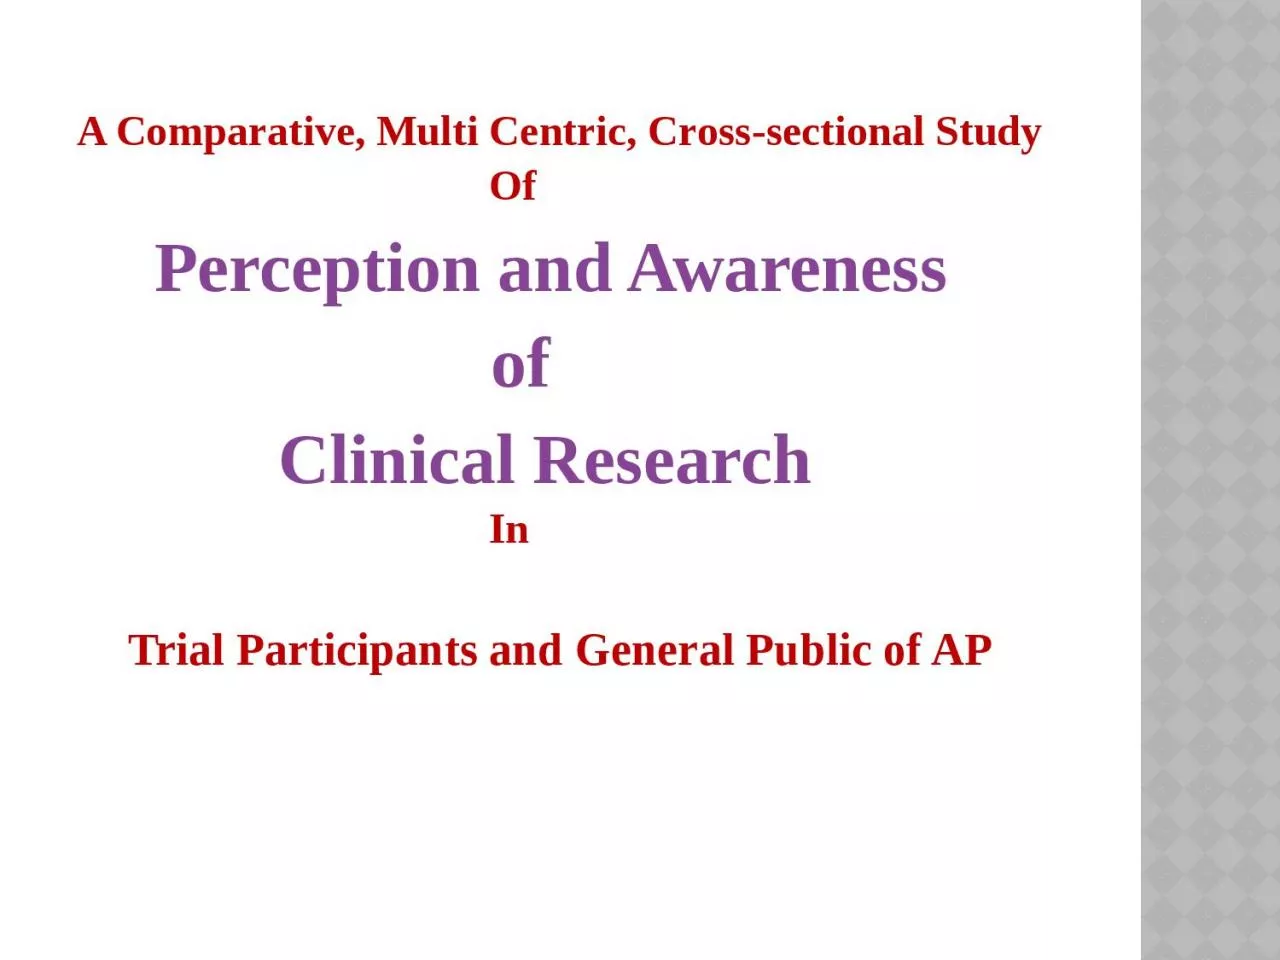 A Comparative, Multi Centric, Cross-sectional Study